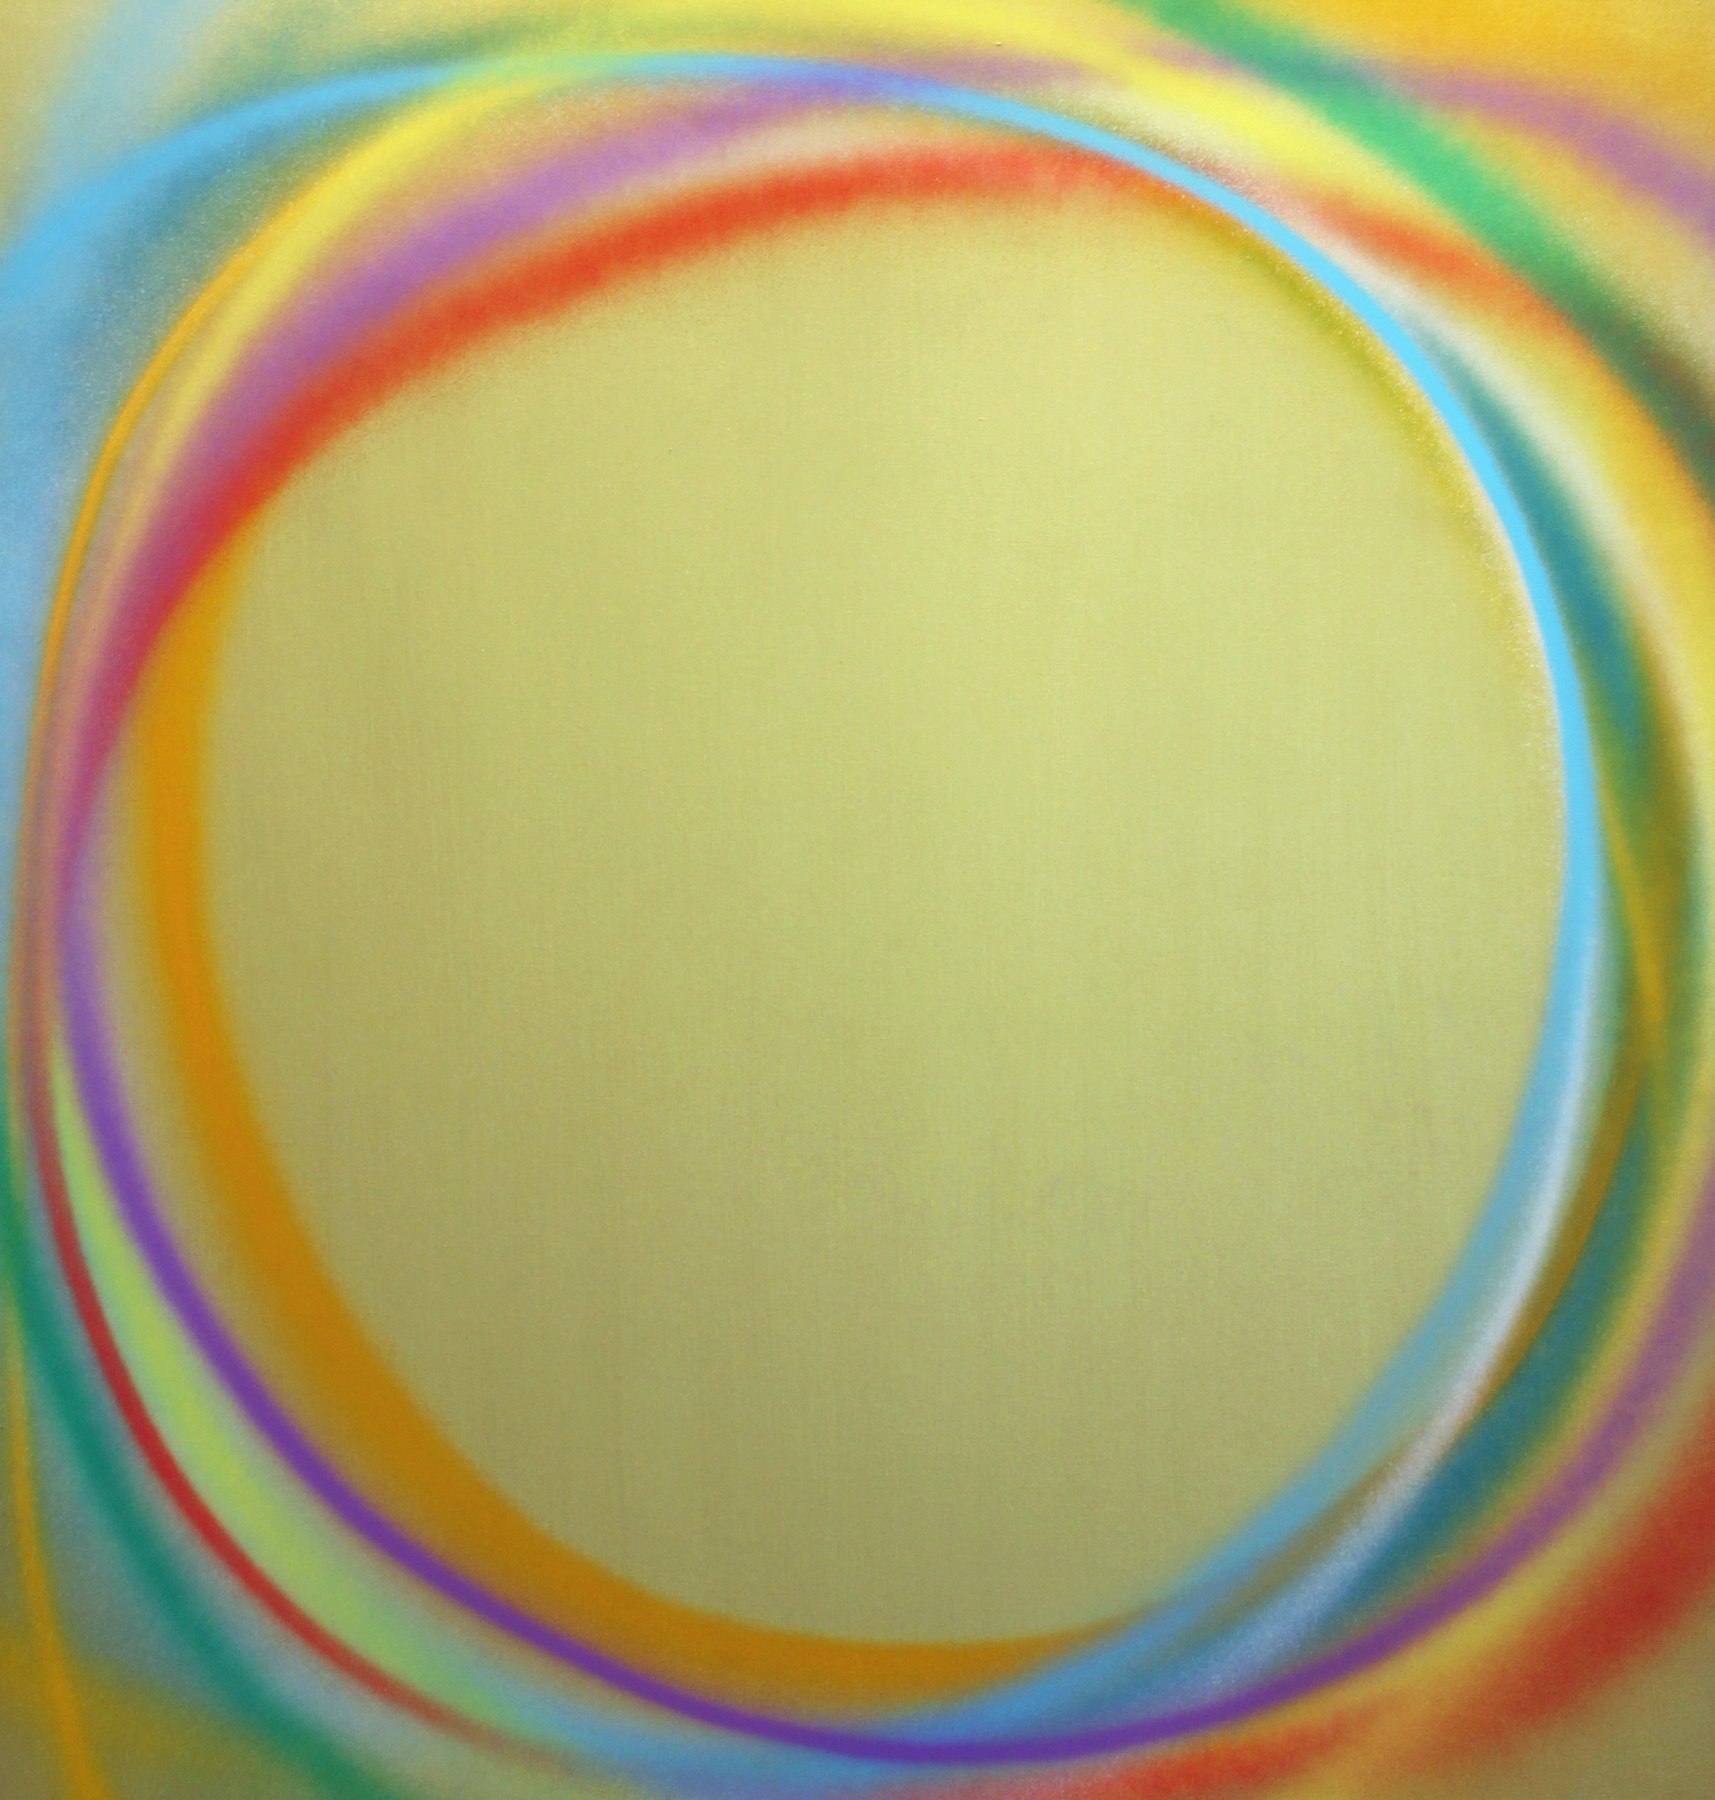 Greenglo, 1988 Acrylic on canvas 62 x 59 inches